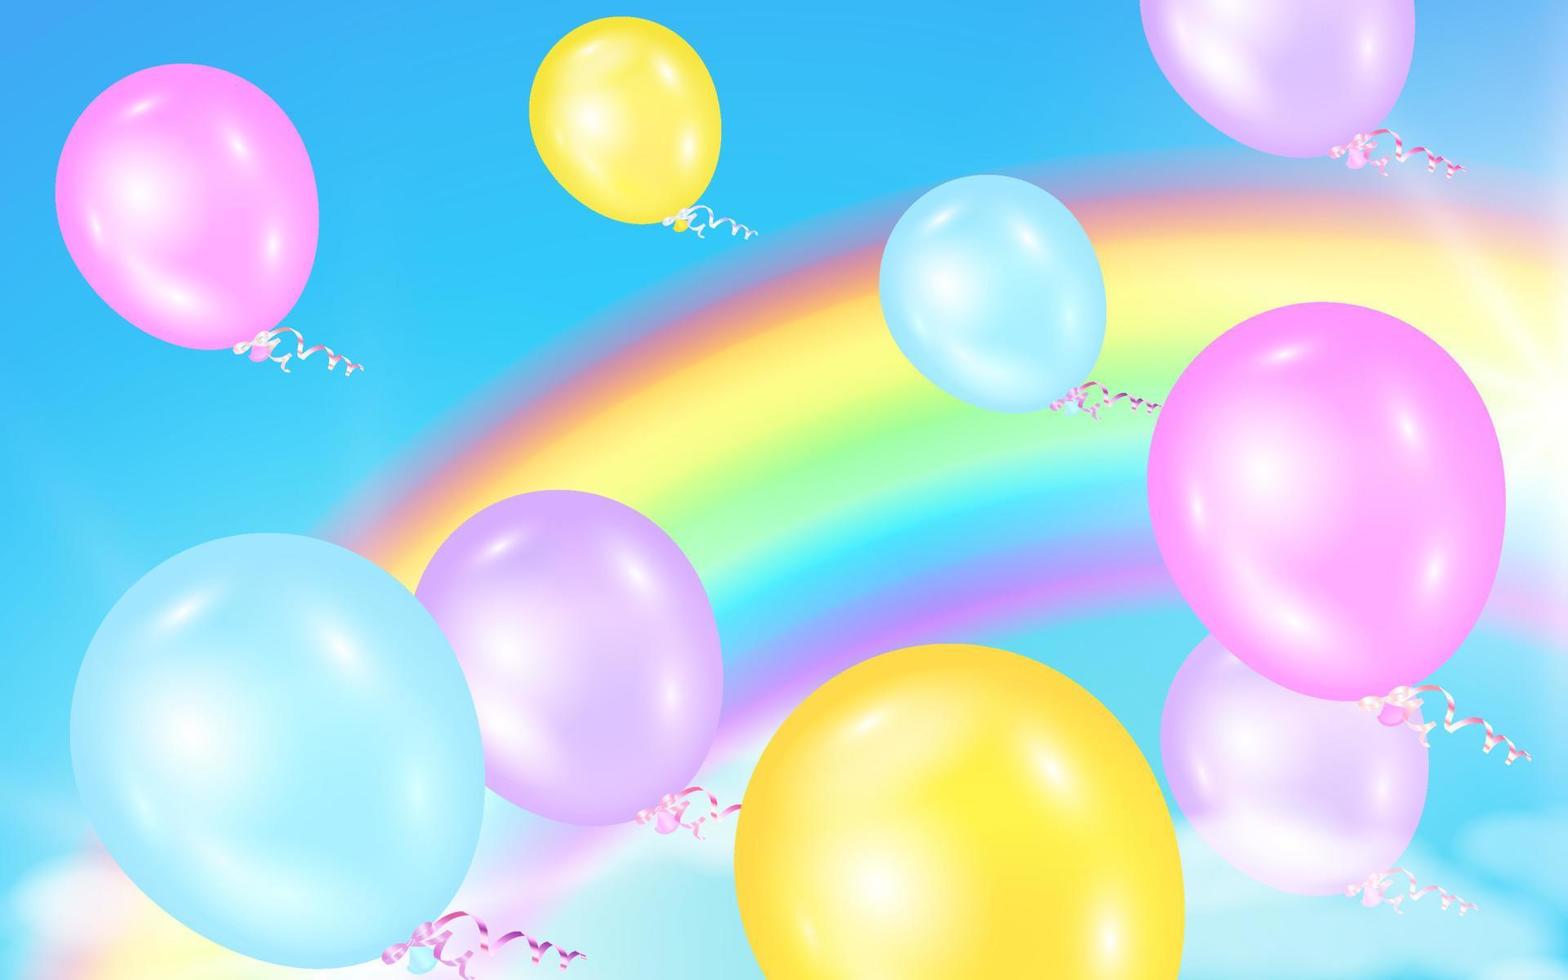 Fantasy background of magical blue sky with flying colorful balloons and, rainbow. vector